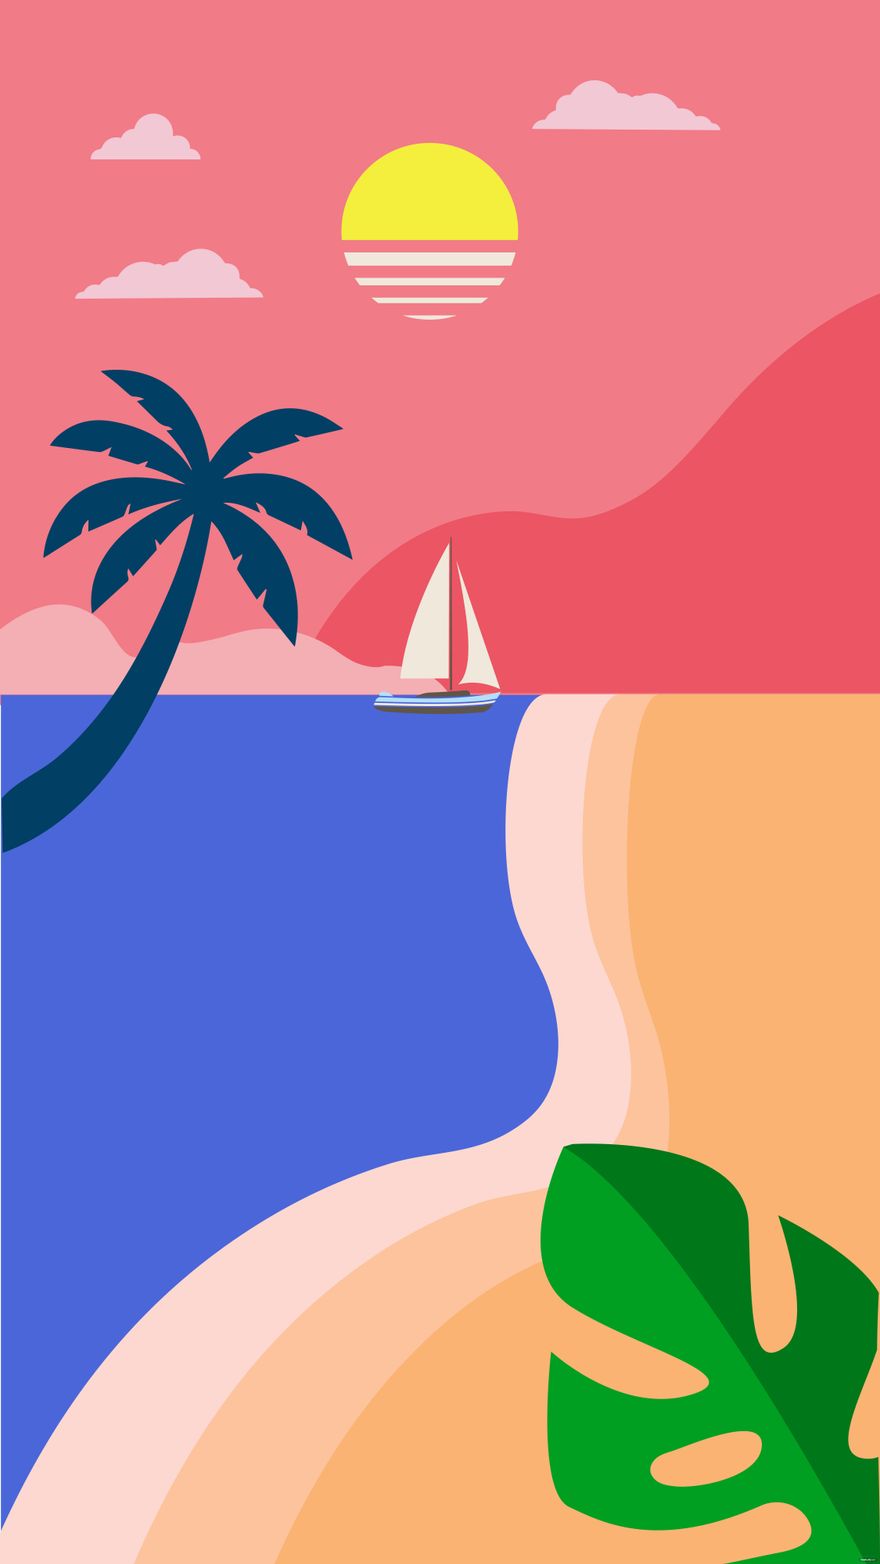 Iphone Beach Background in Illustrator, EPS, SVG, JPG, PNG